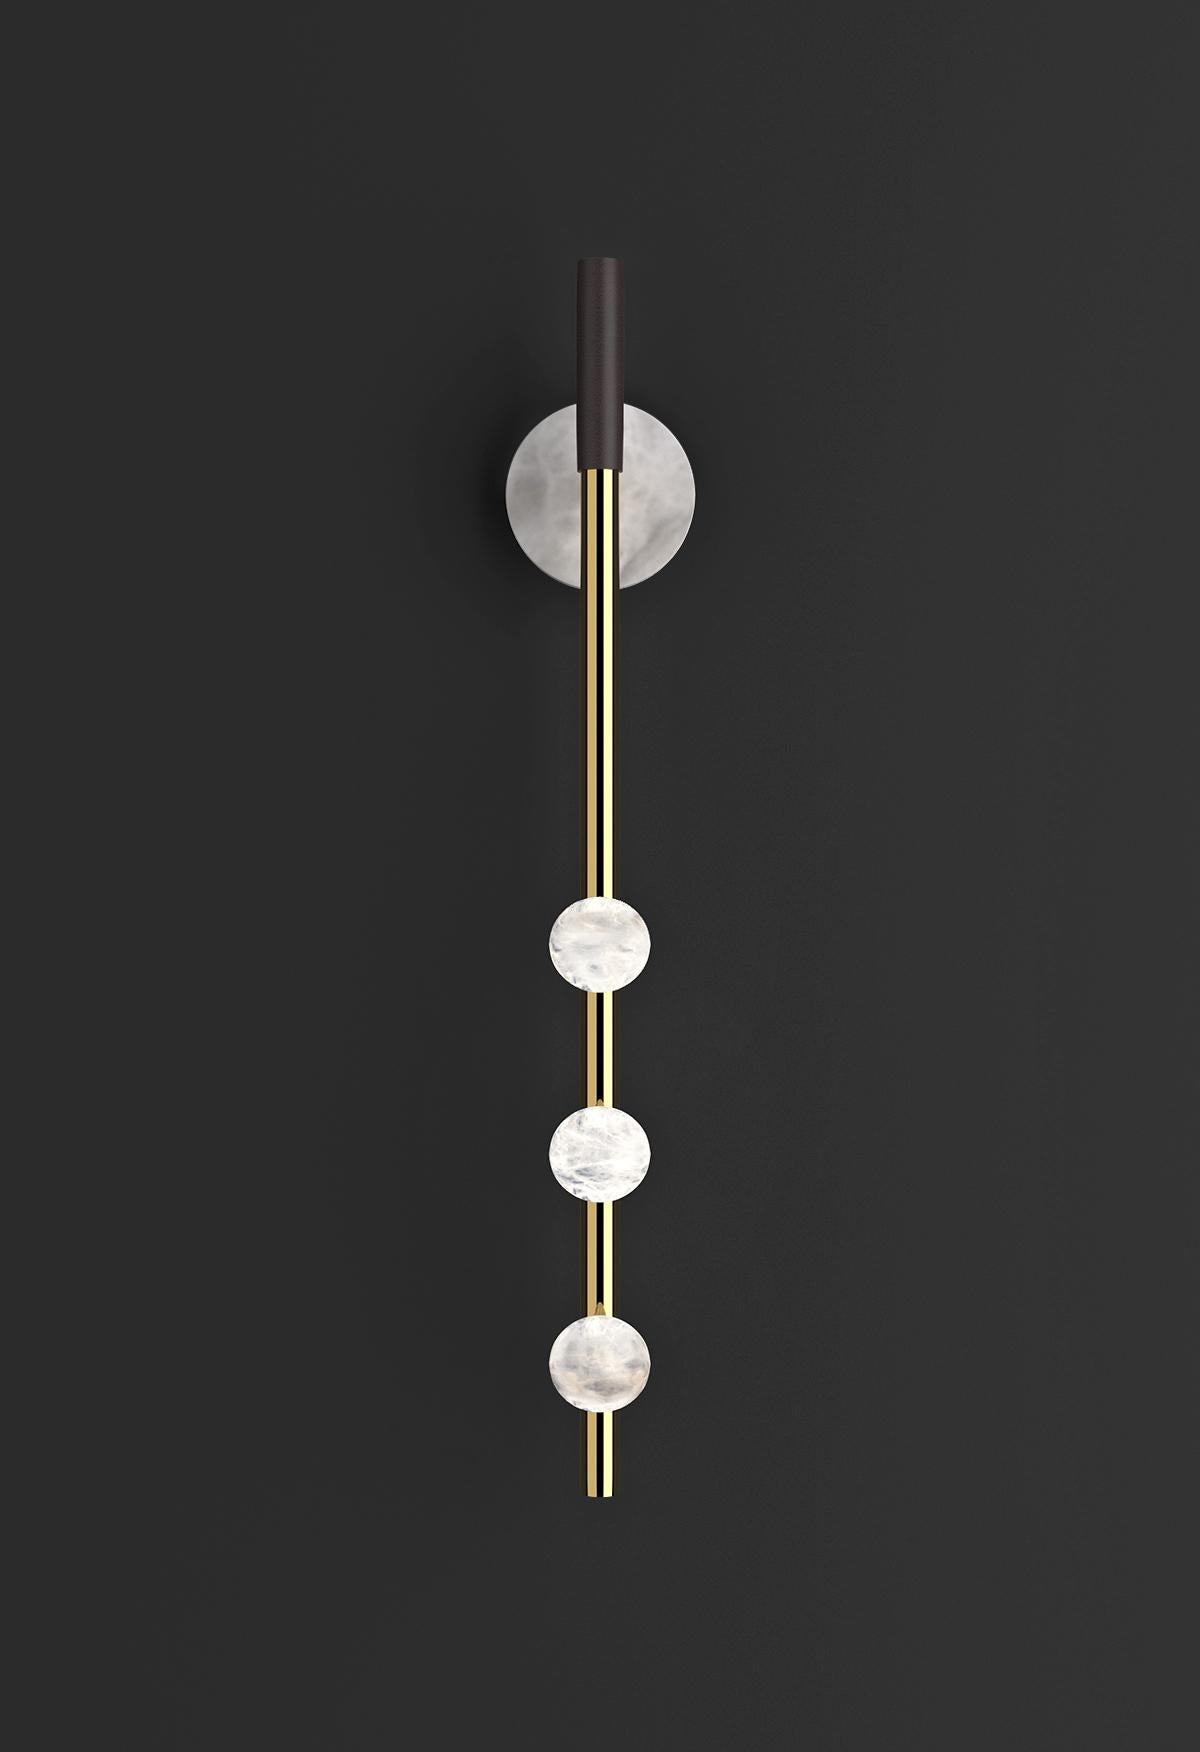 Demetra Shiny Gold Metal Wall Lamp by Alabastro Italiano
Dimensions: D 9 x W 10 x H 60 cm.
Materials: White alabaster, metal and leather.

Available in different finishes: Shiny Silver, Bronze, Brushed Brass, Ruggine of Florence, Brushed Burnished,